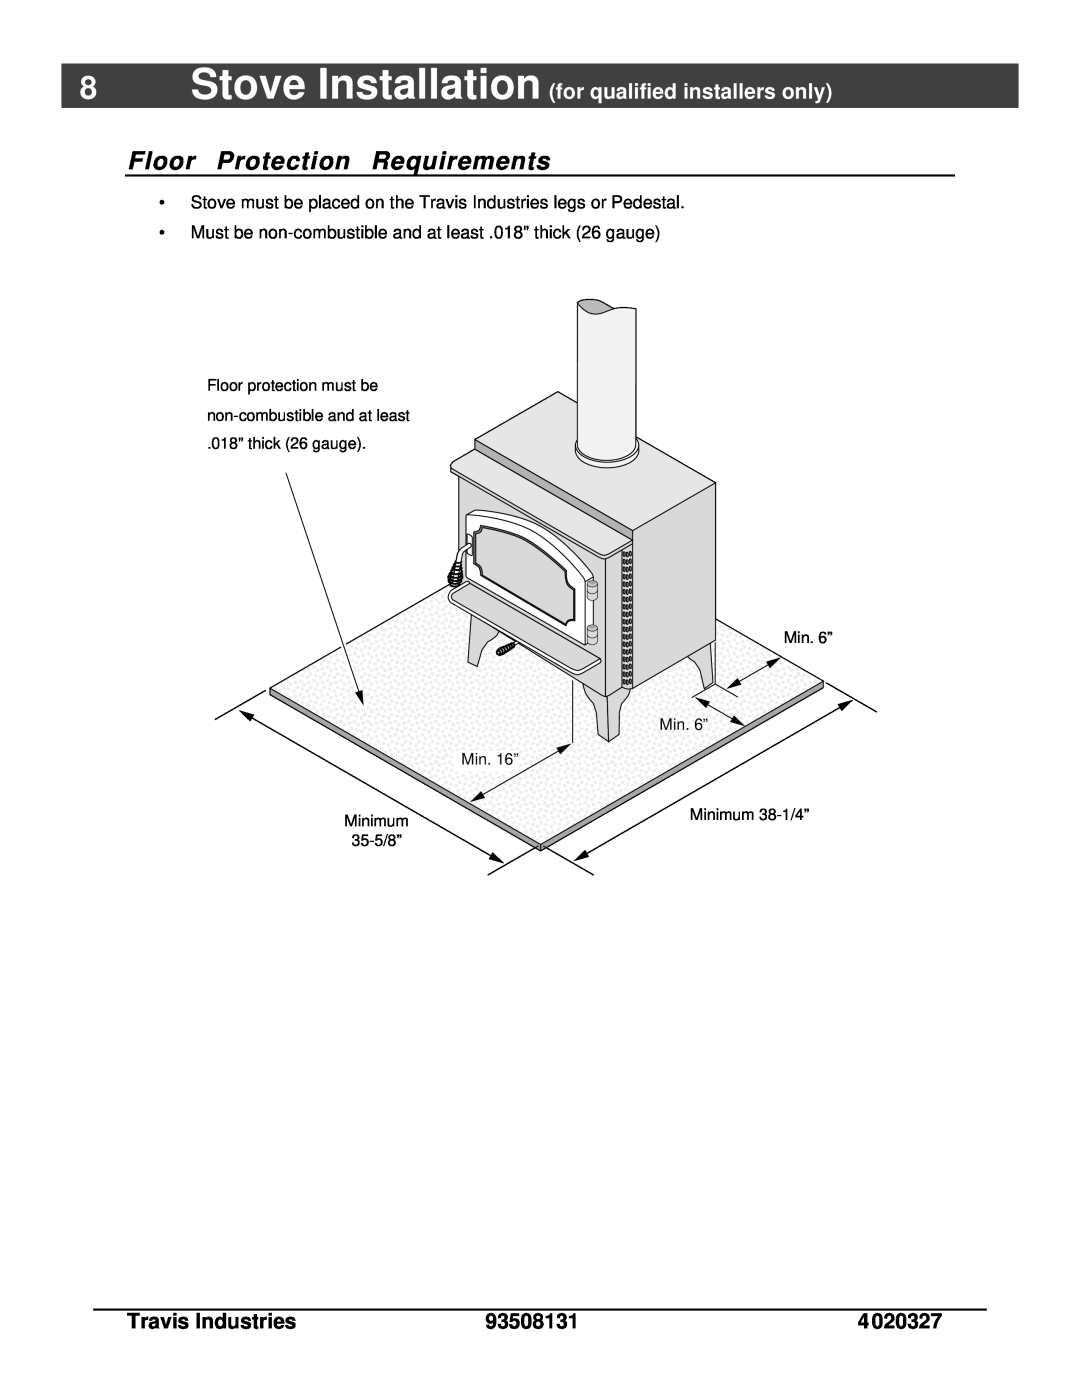 Lopi Answer Wood Stove Floor Protection Requirements, Stove Installation for qualified installers only, Min. 6”, Min. 16” 